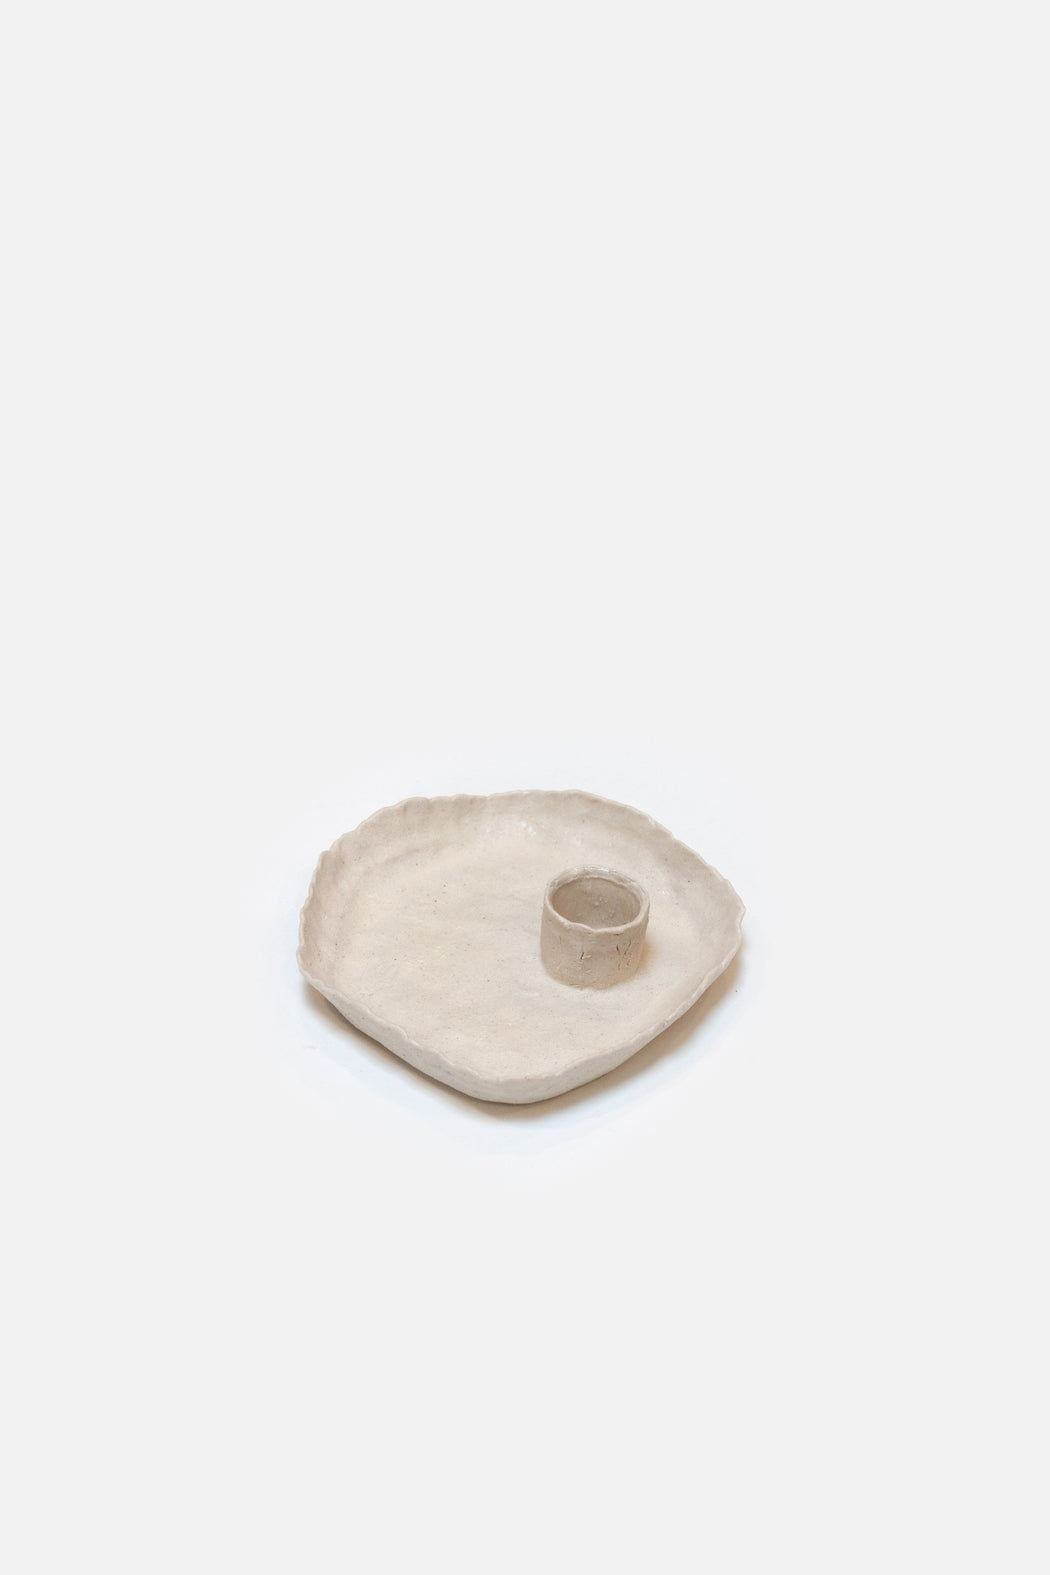 Of The Earth | Ancient Sand Candle Holder | Ceramic | Hazel & Rose | Minneapolis